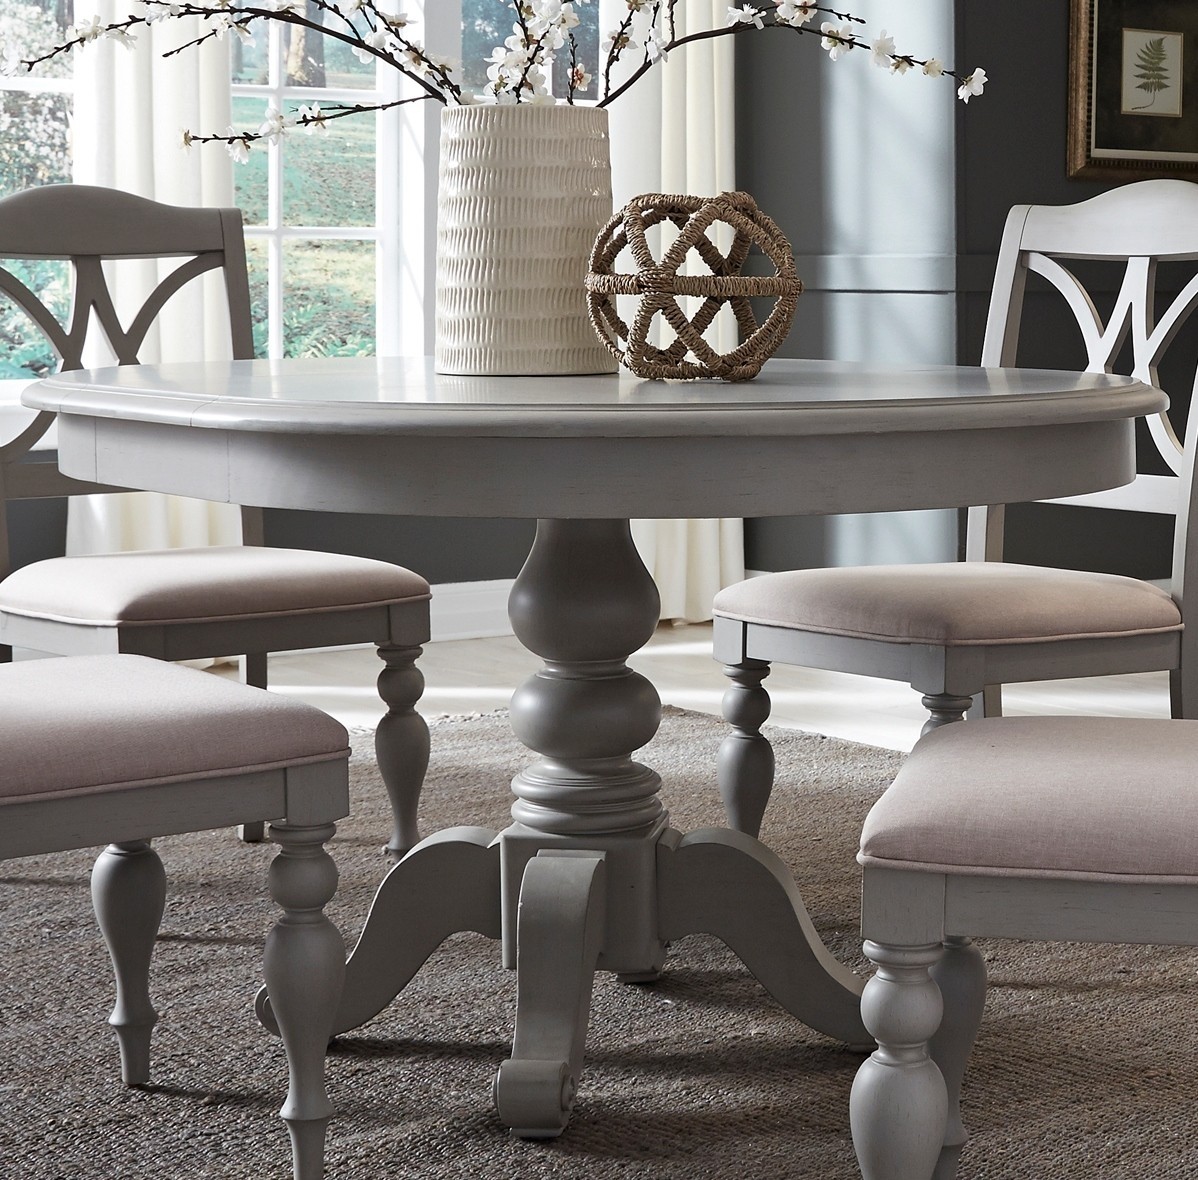 Summer house dove grey round extendable dining table from